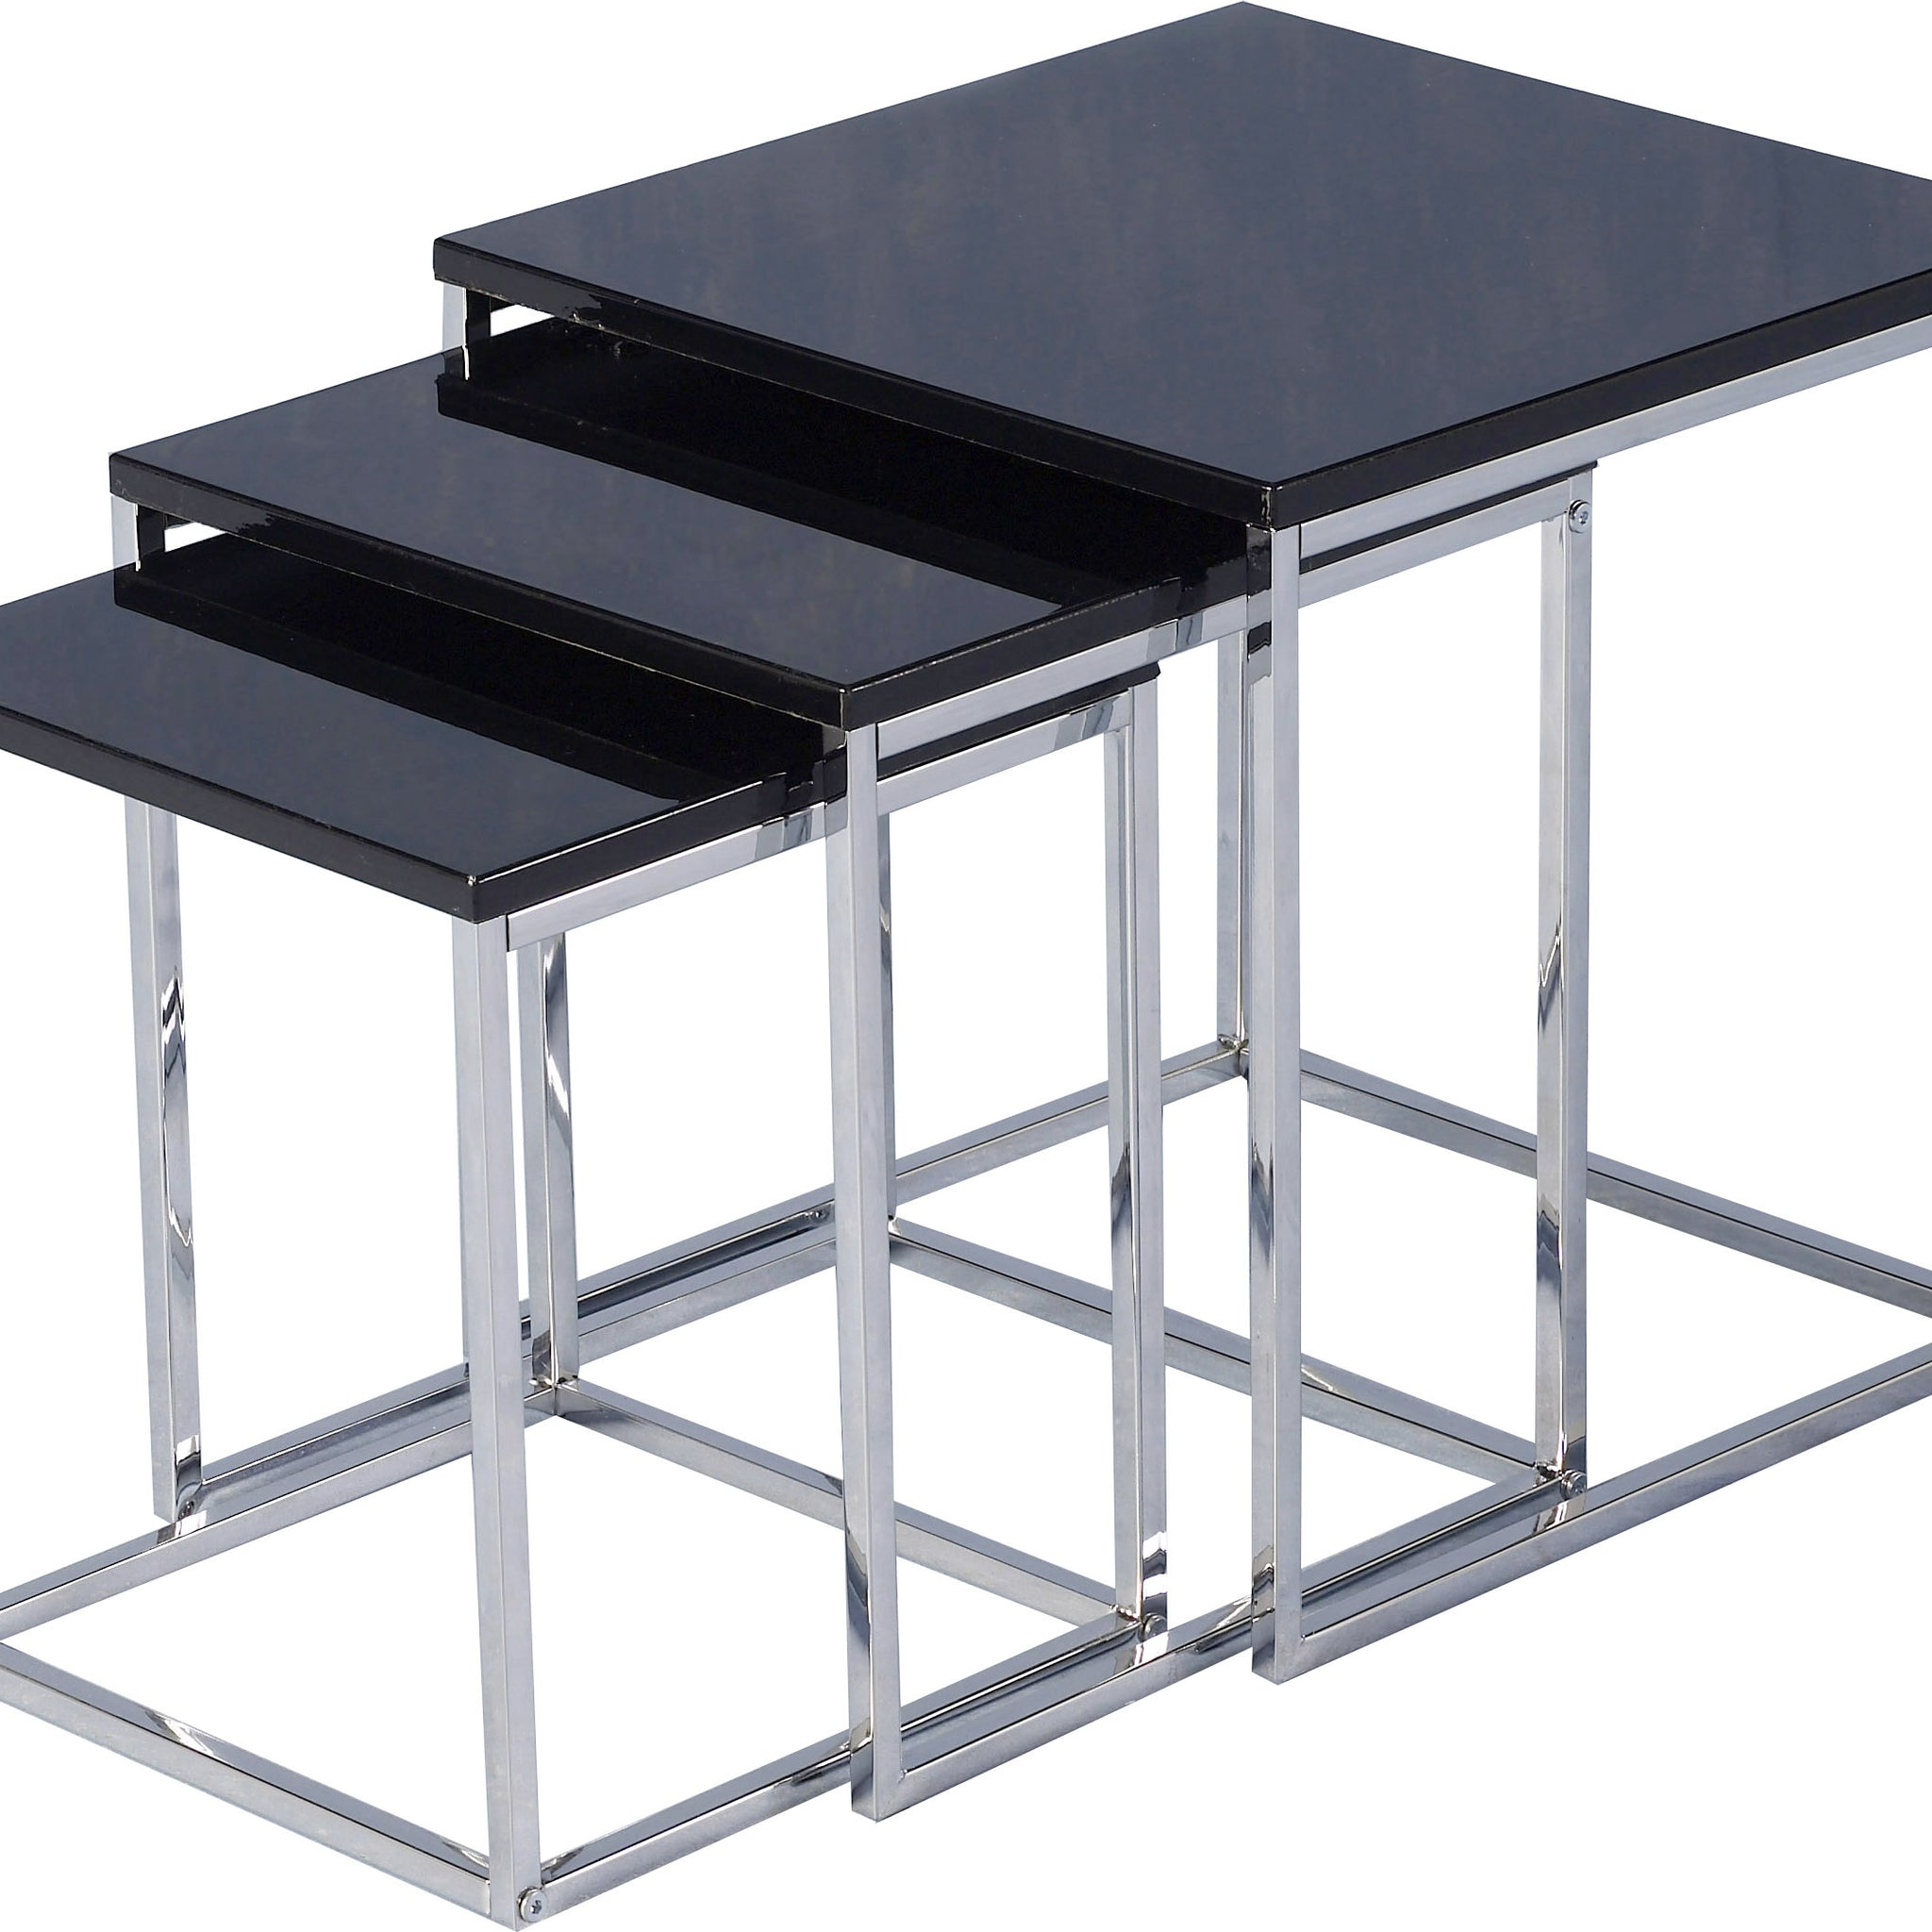 Charisma Nest Of Tables - Black Gloss/Chrome - The Right Buy Store